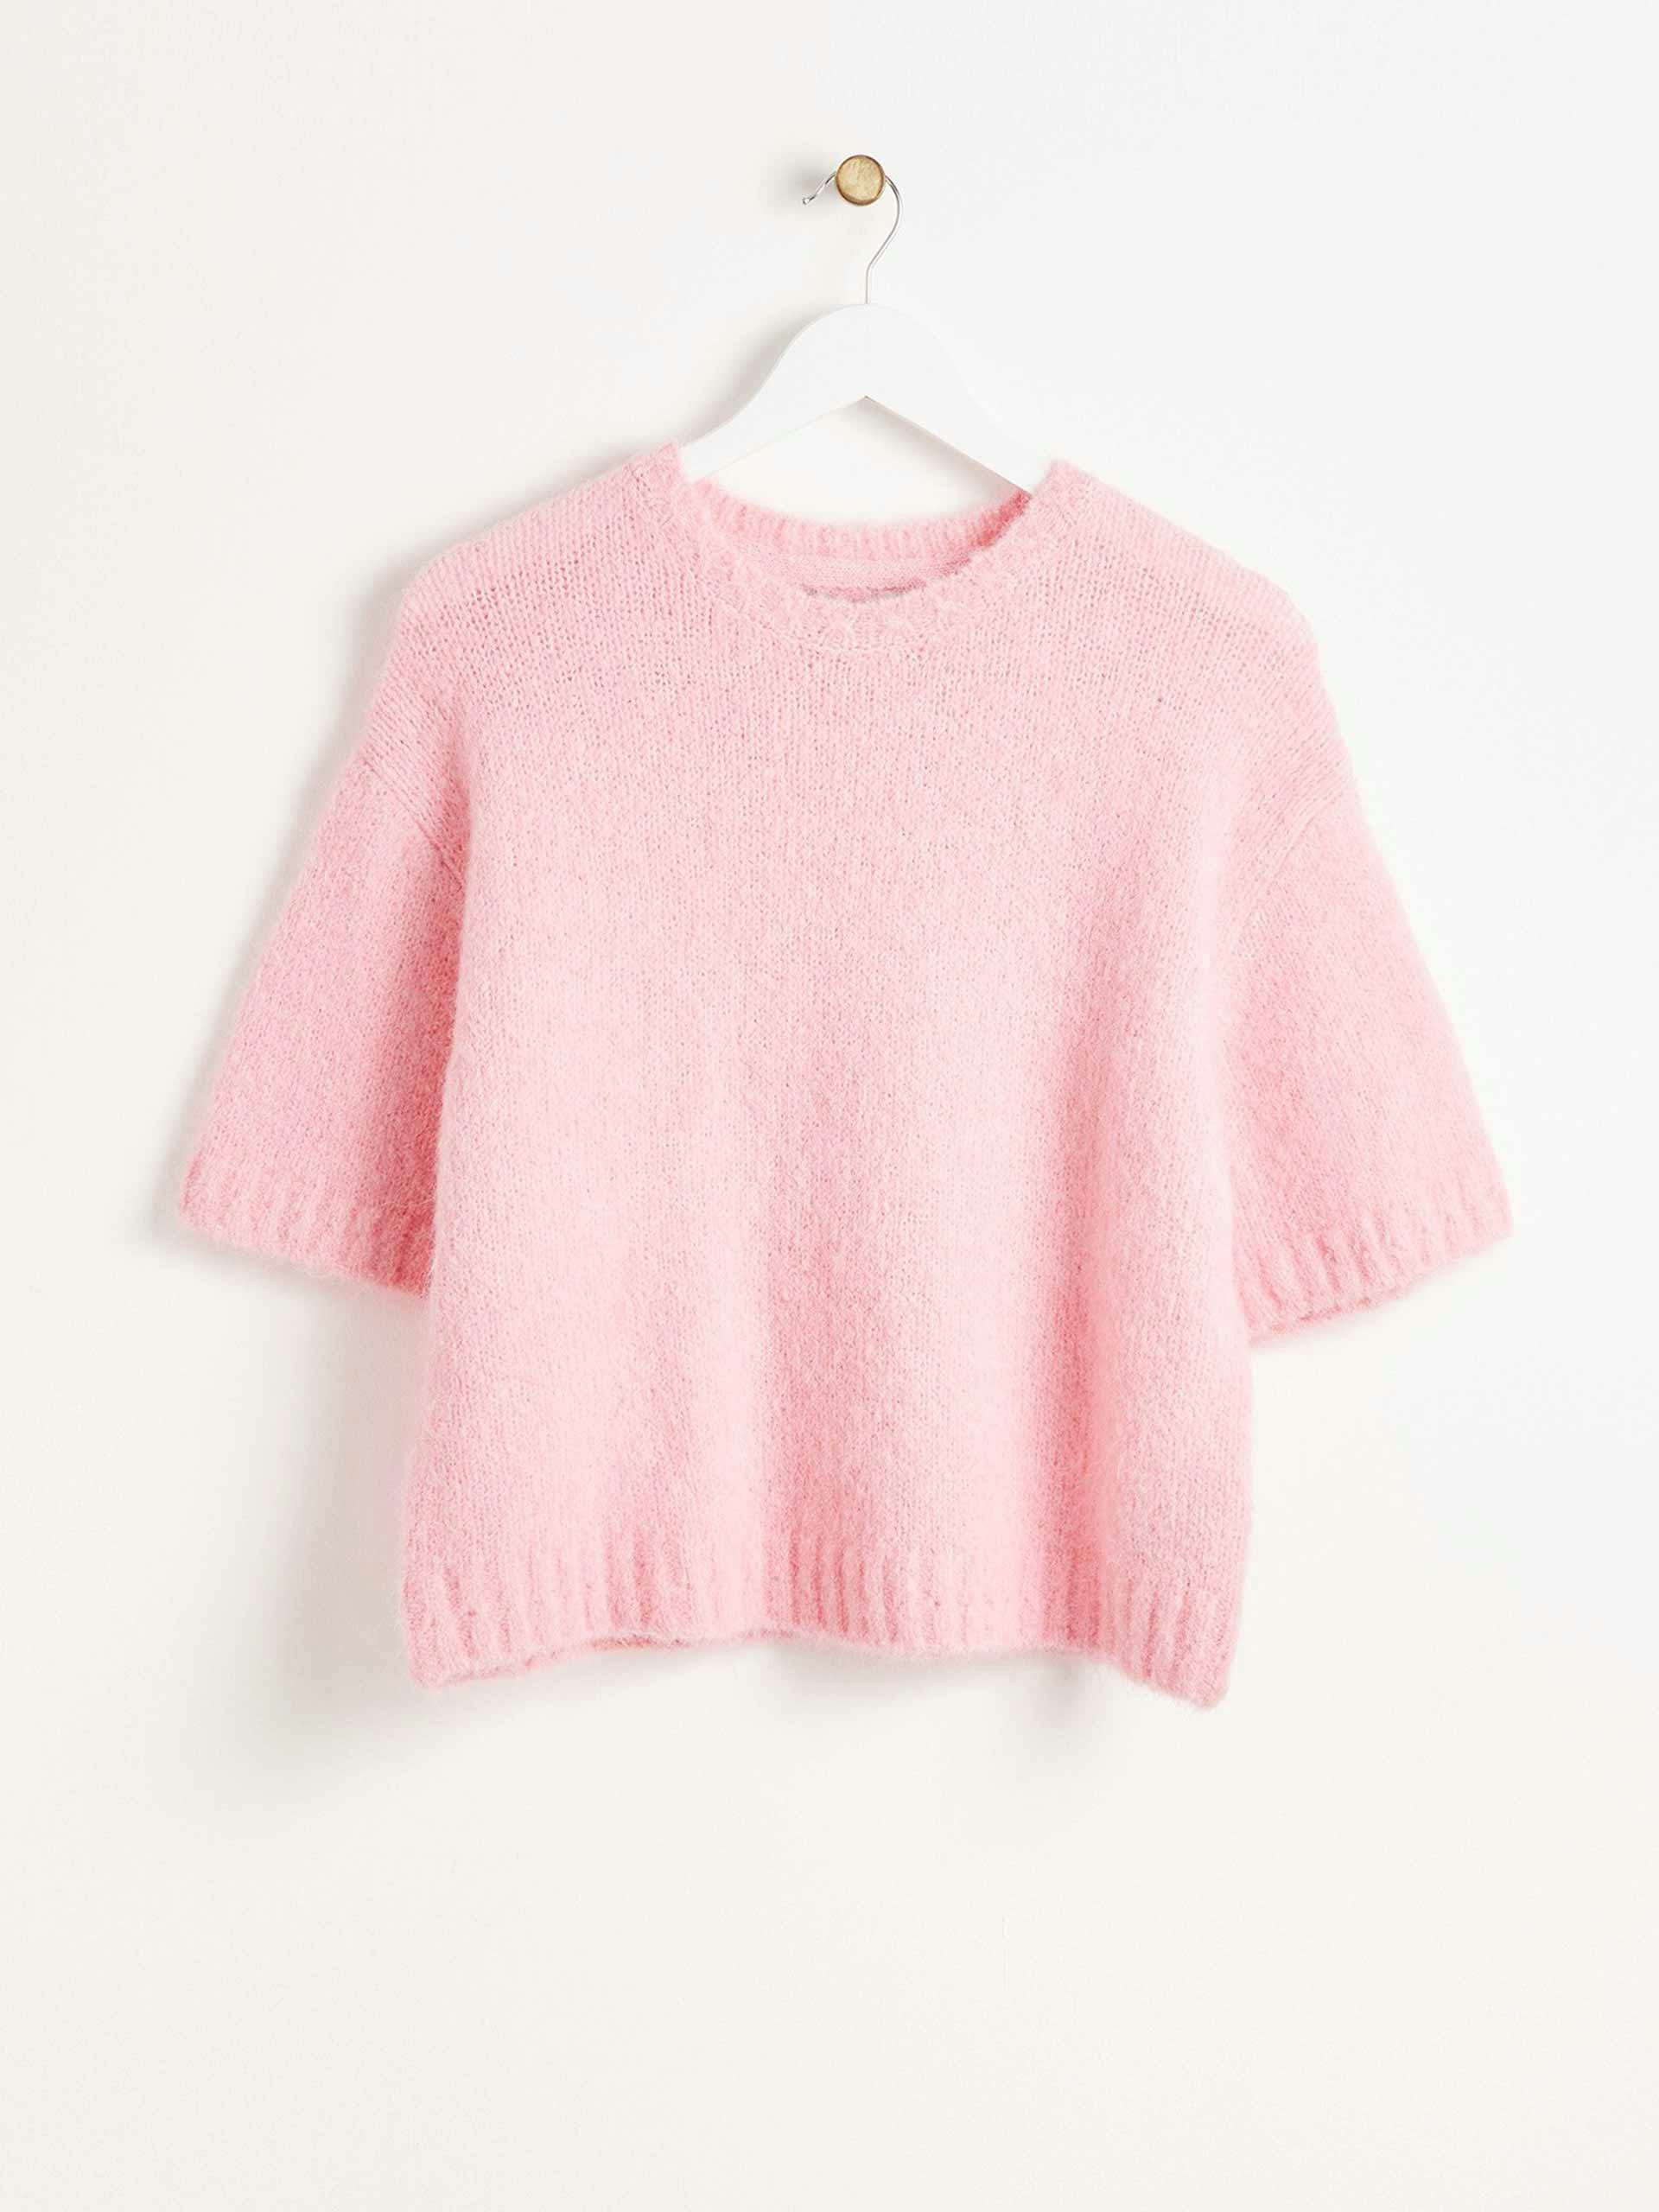 Fluffy pink knitted shell top